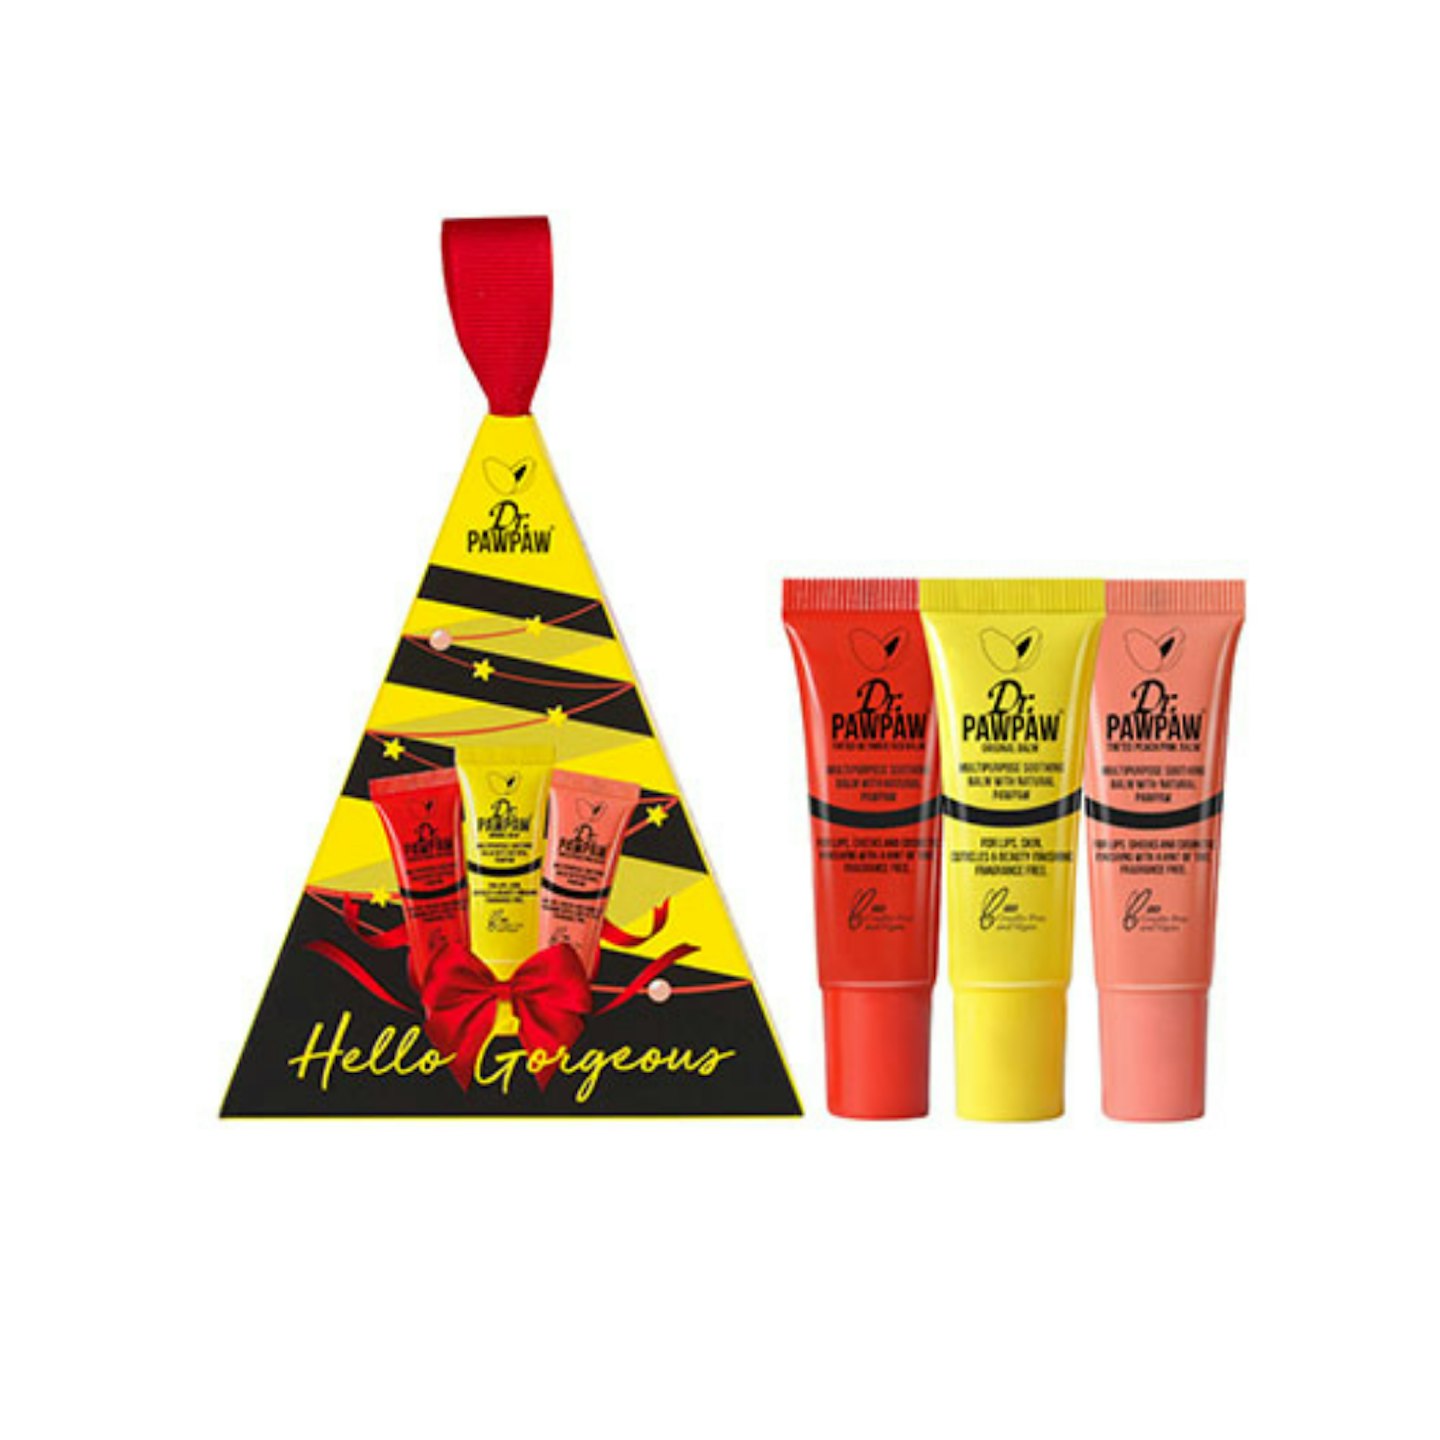 Dr.PAWPAW Classic Balms 3 x 10ml Festive Tree Gift Set. Includes Ultimate Red, Original Balm, Peach Pink Tinted Lip Balms